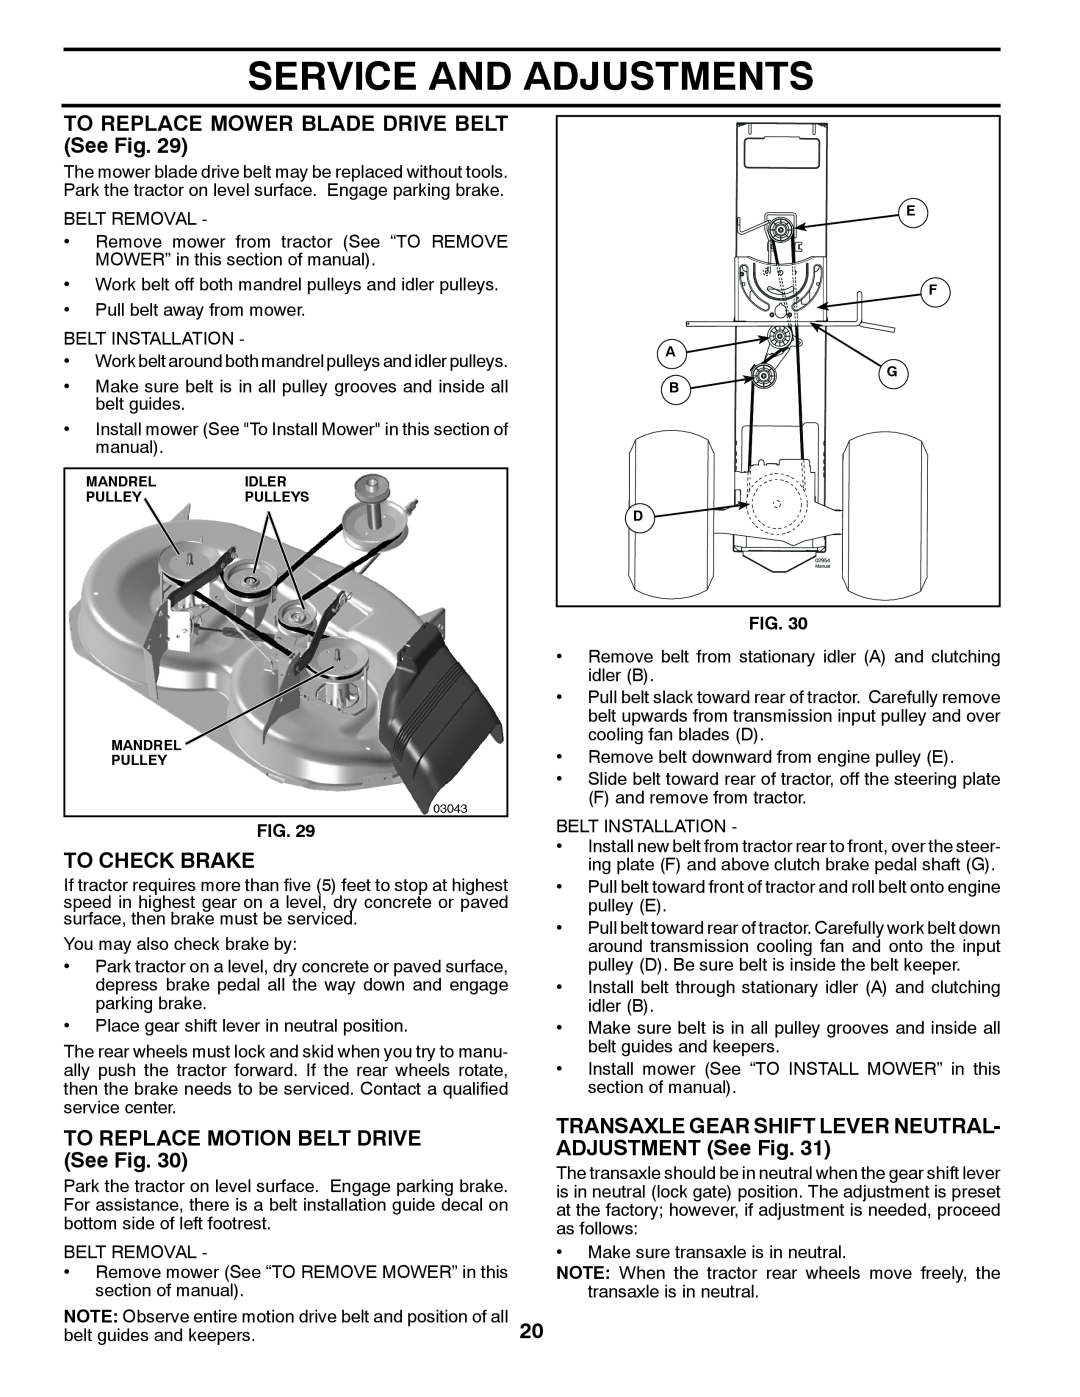 Poulan 96042011300, 432448 TO REPLACE MOWER BLADE DRIVE BELT See Fig, To Check Brake, TO REPLACE MOTION BELT DRIVE See Fig 